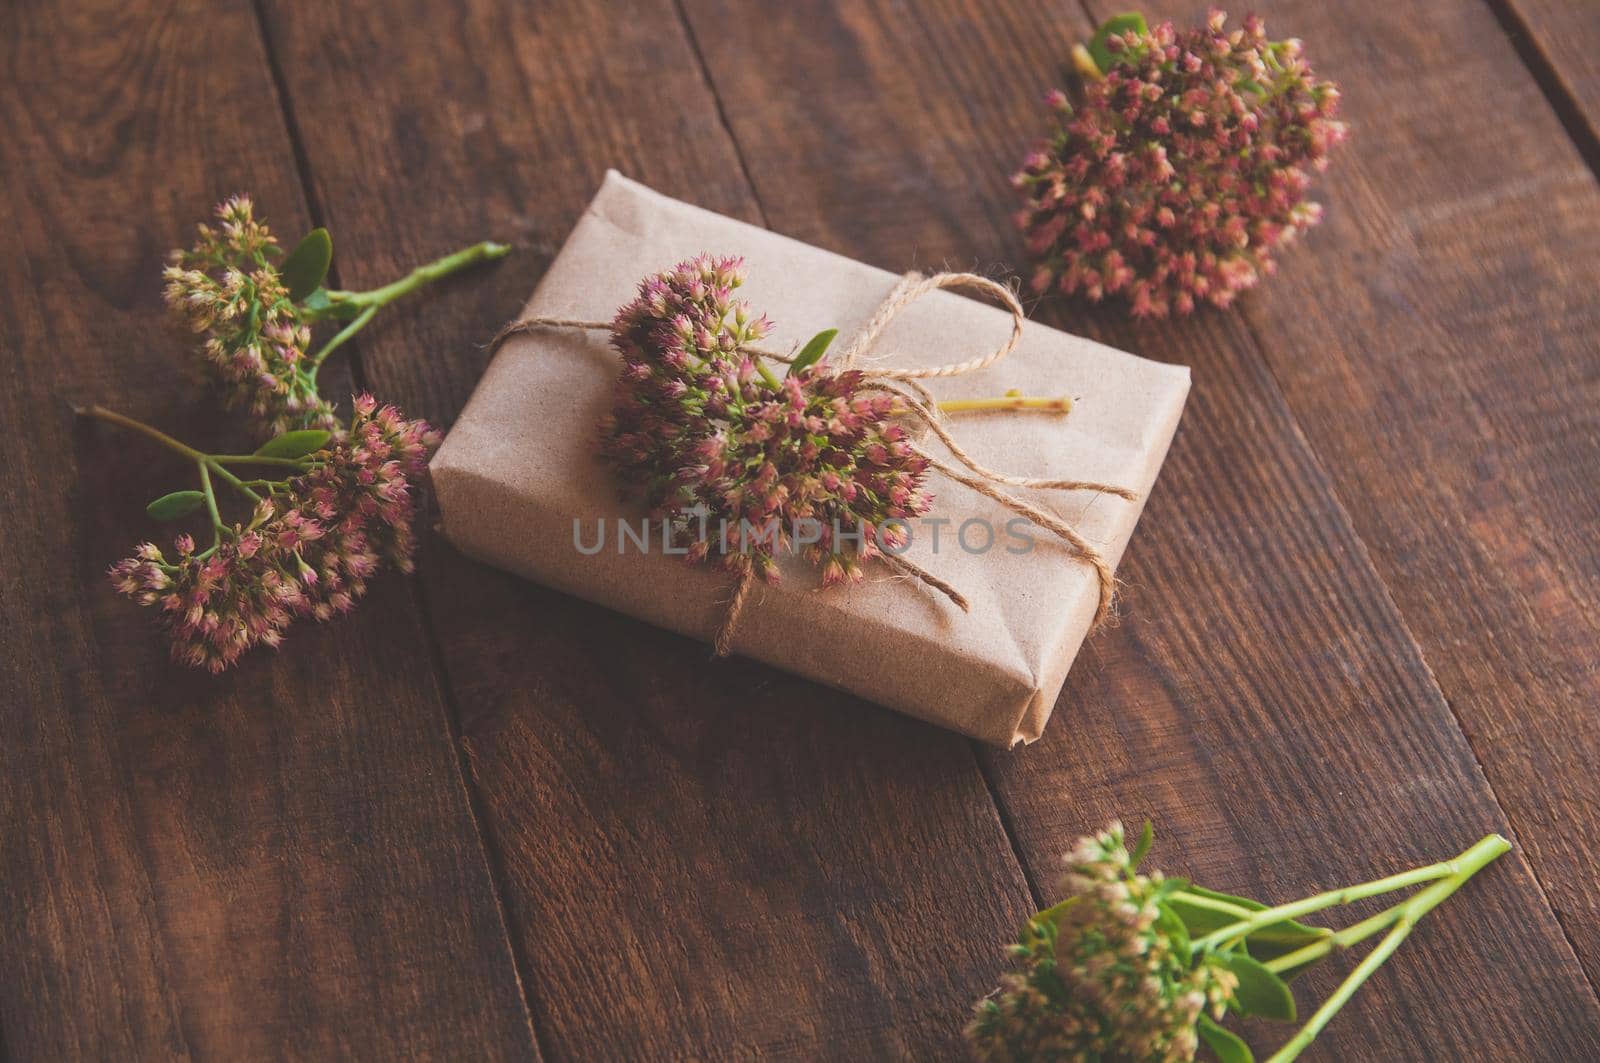 Homemade wrapped Present on a wood table. Close-up image of beautiful gift box decorated with flowers